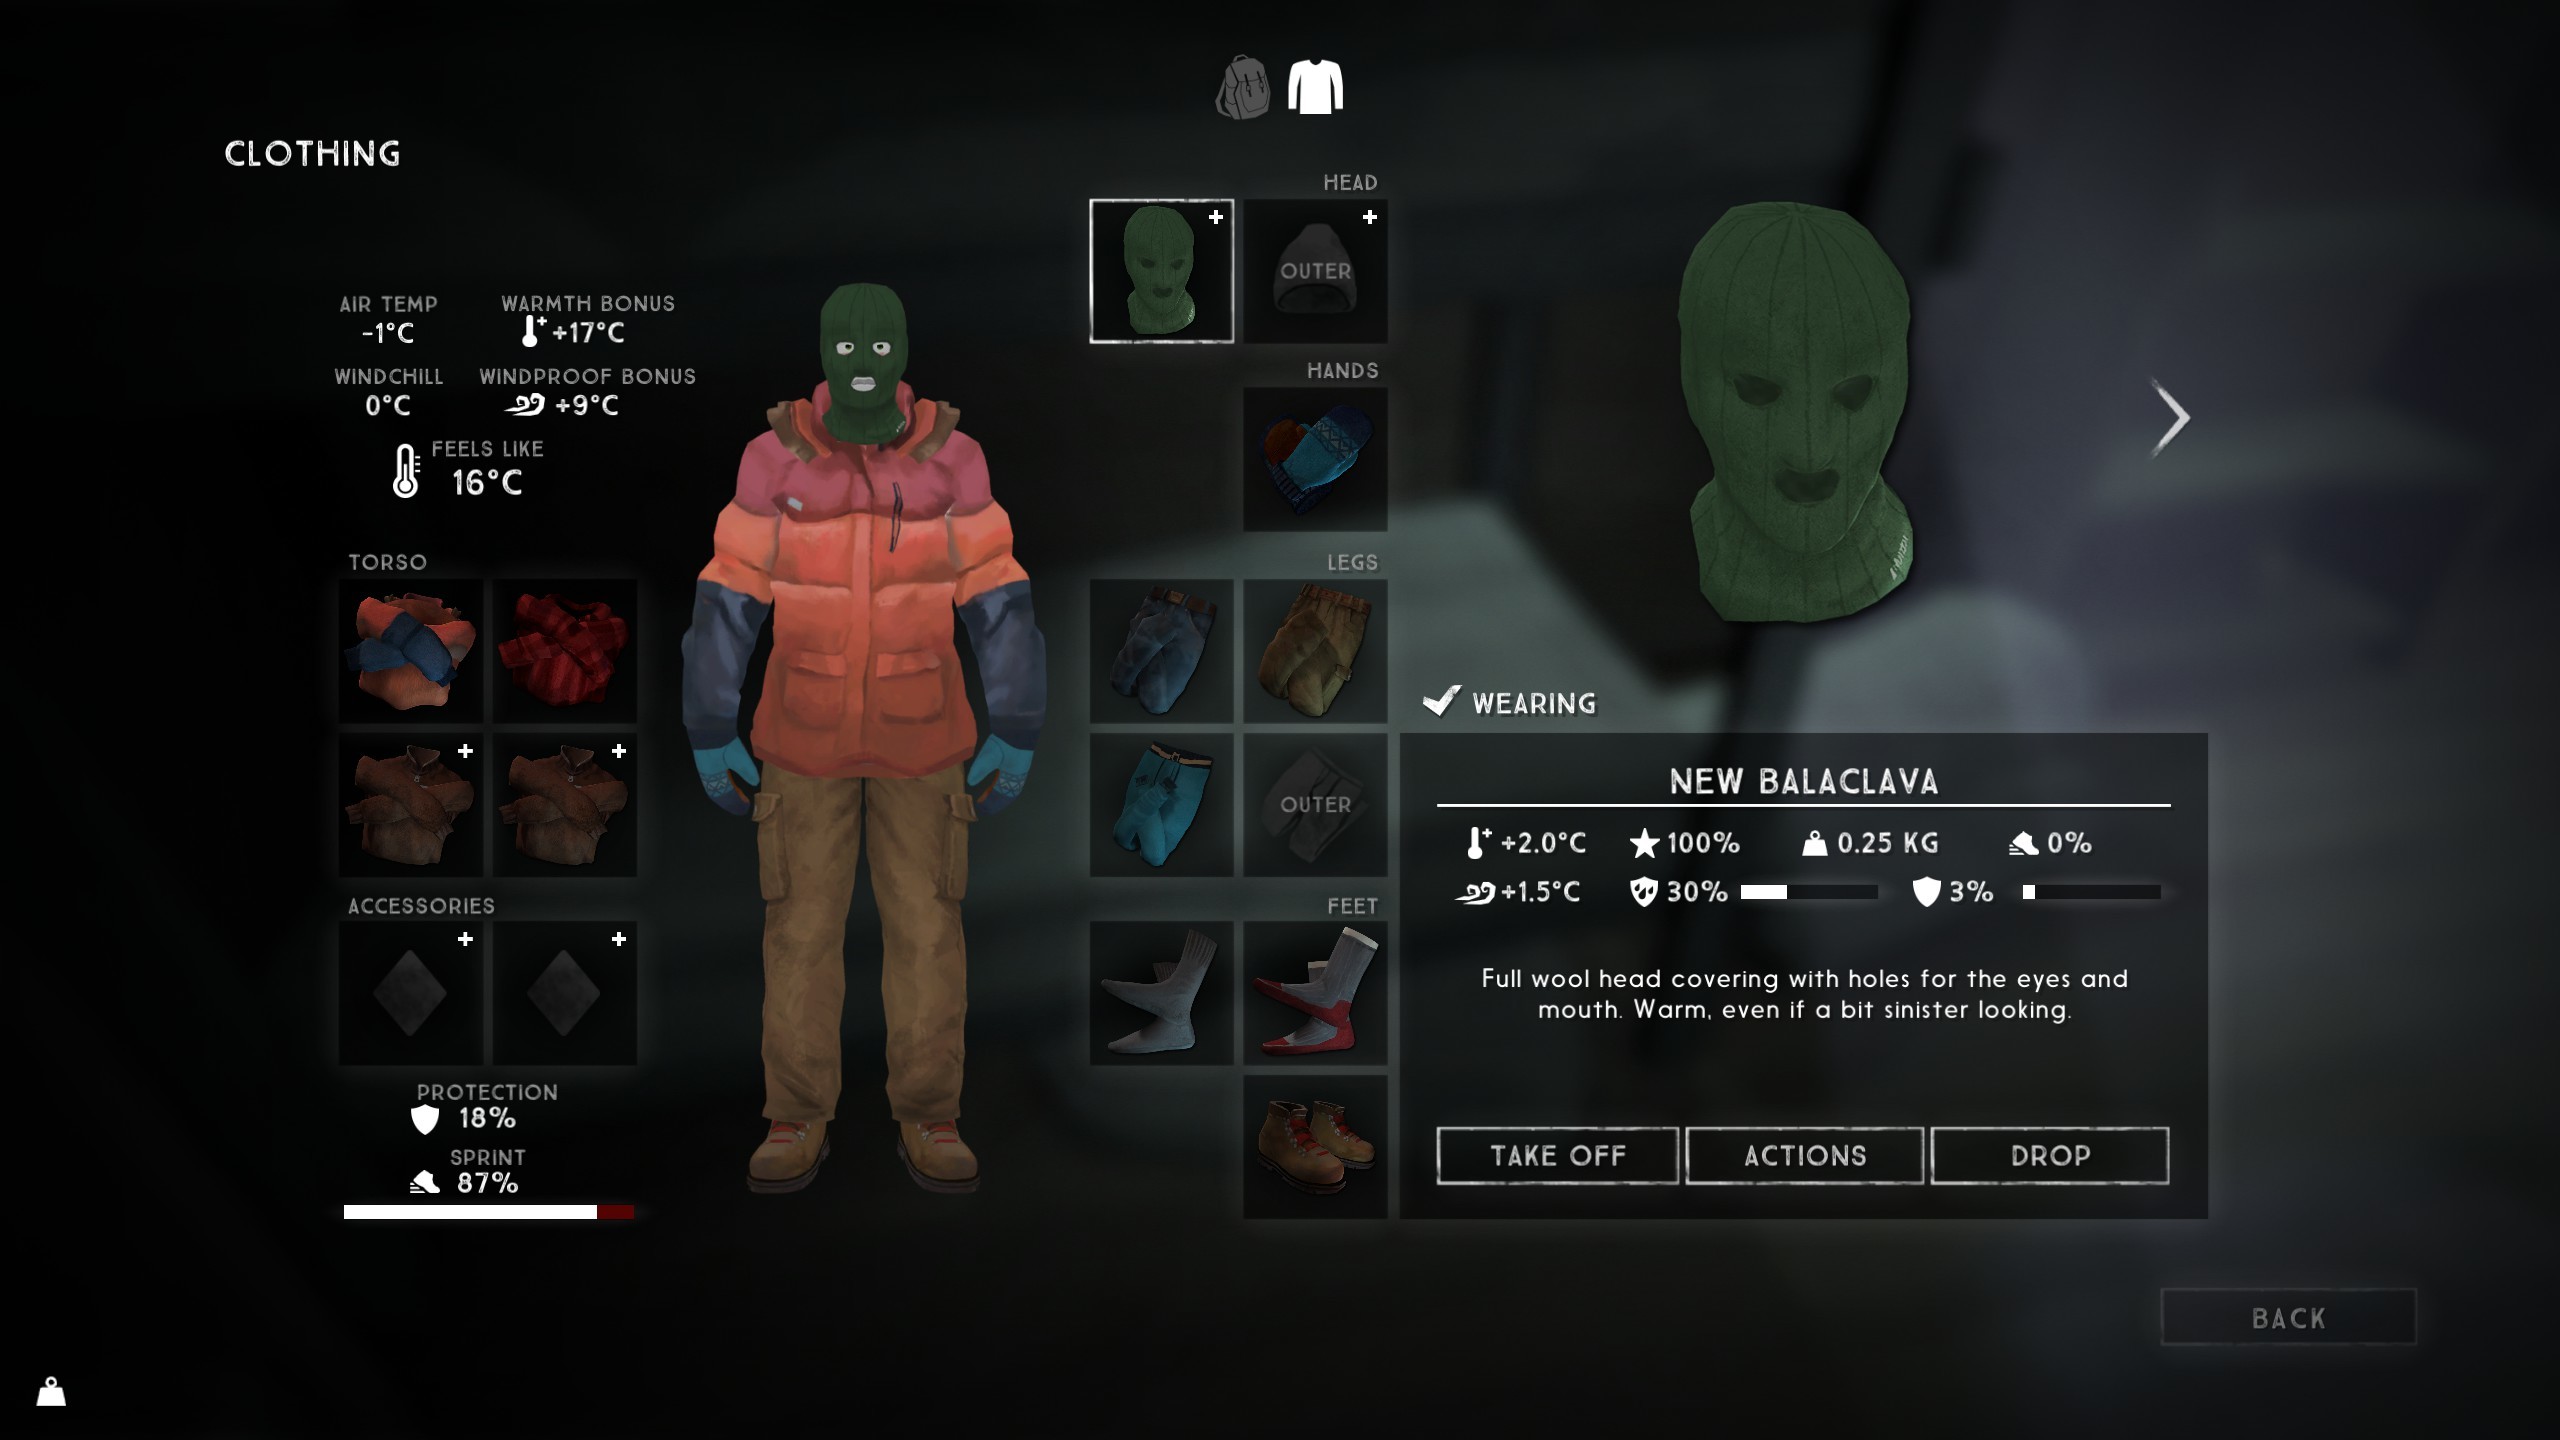 2560x1440 The Balaclava and Wool Toque is the meta for clothing items on your head in  The